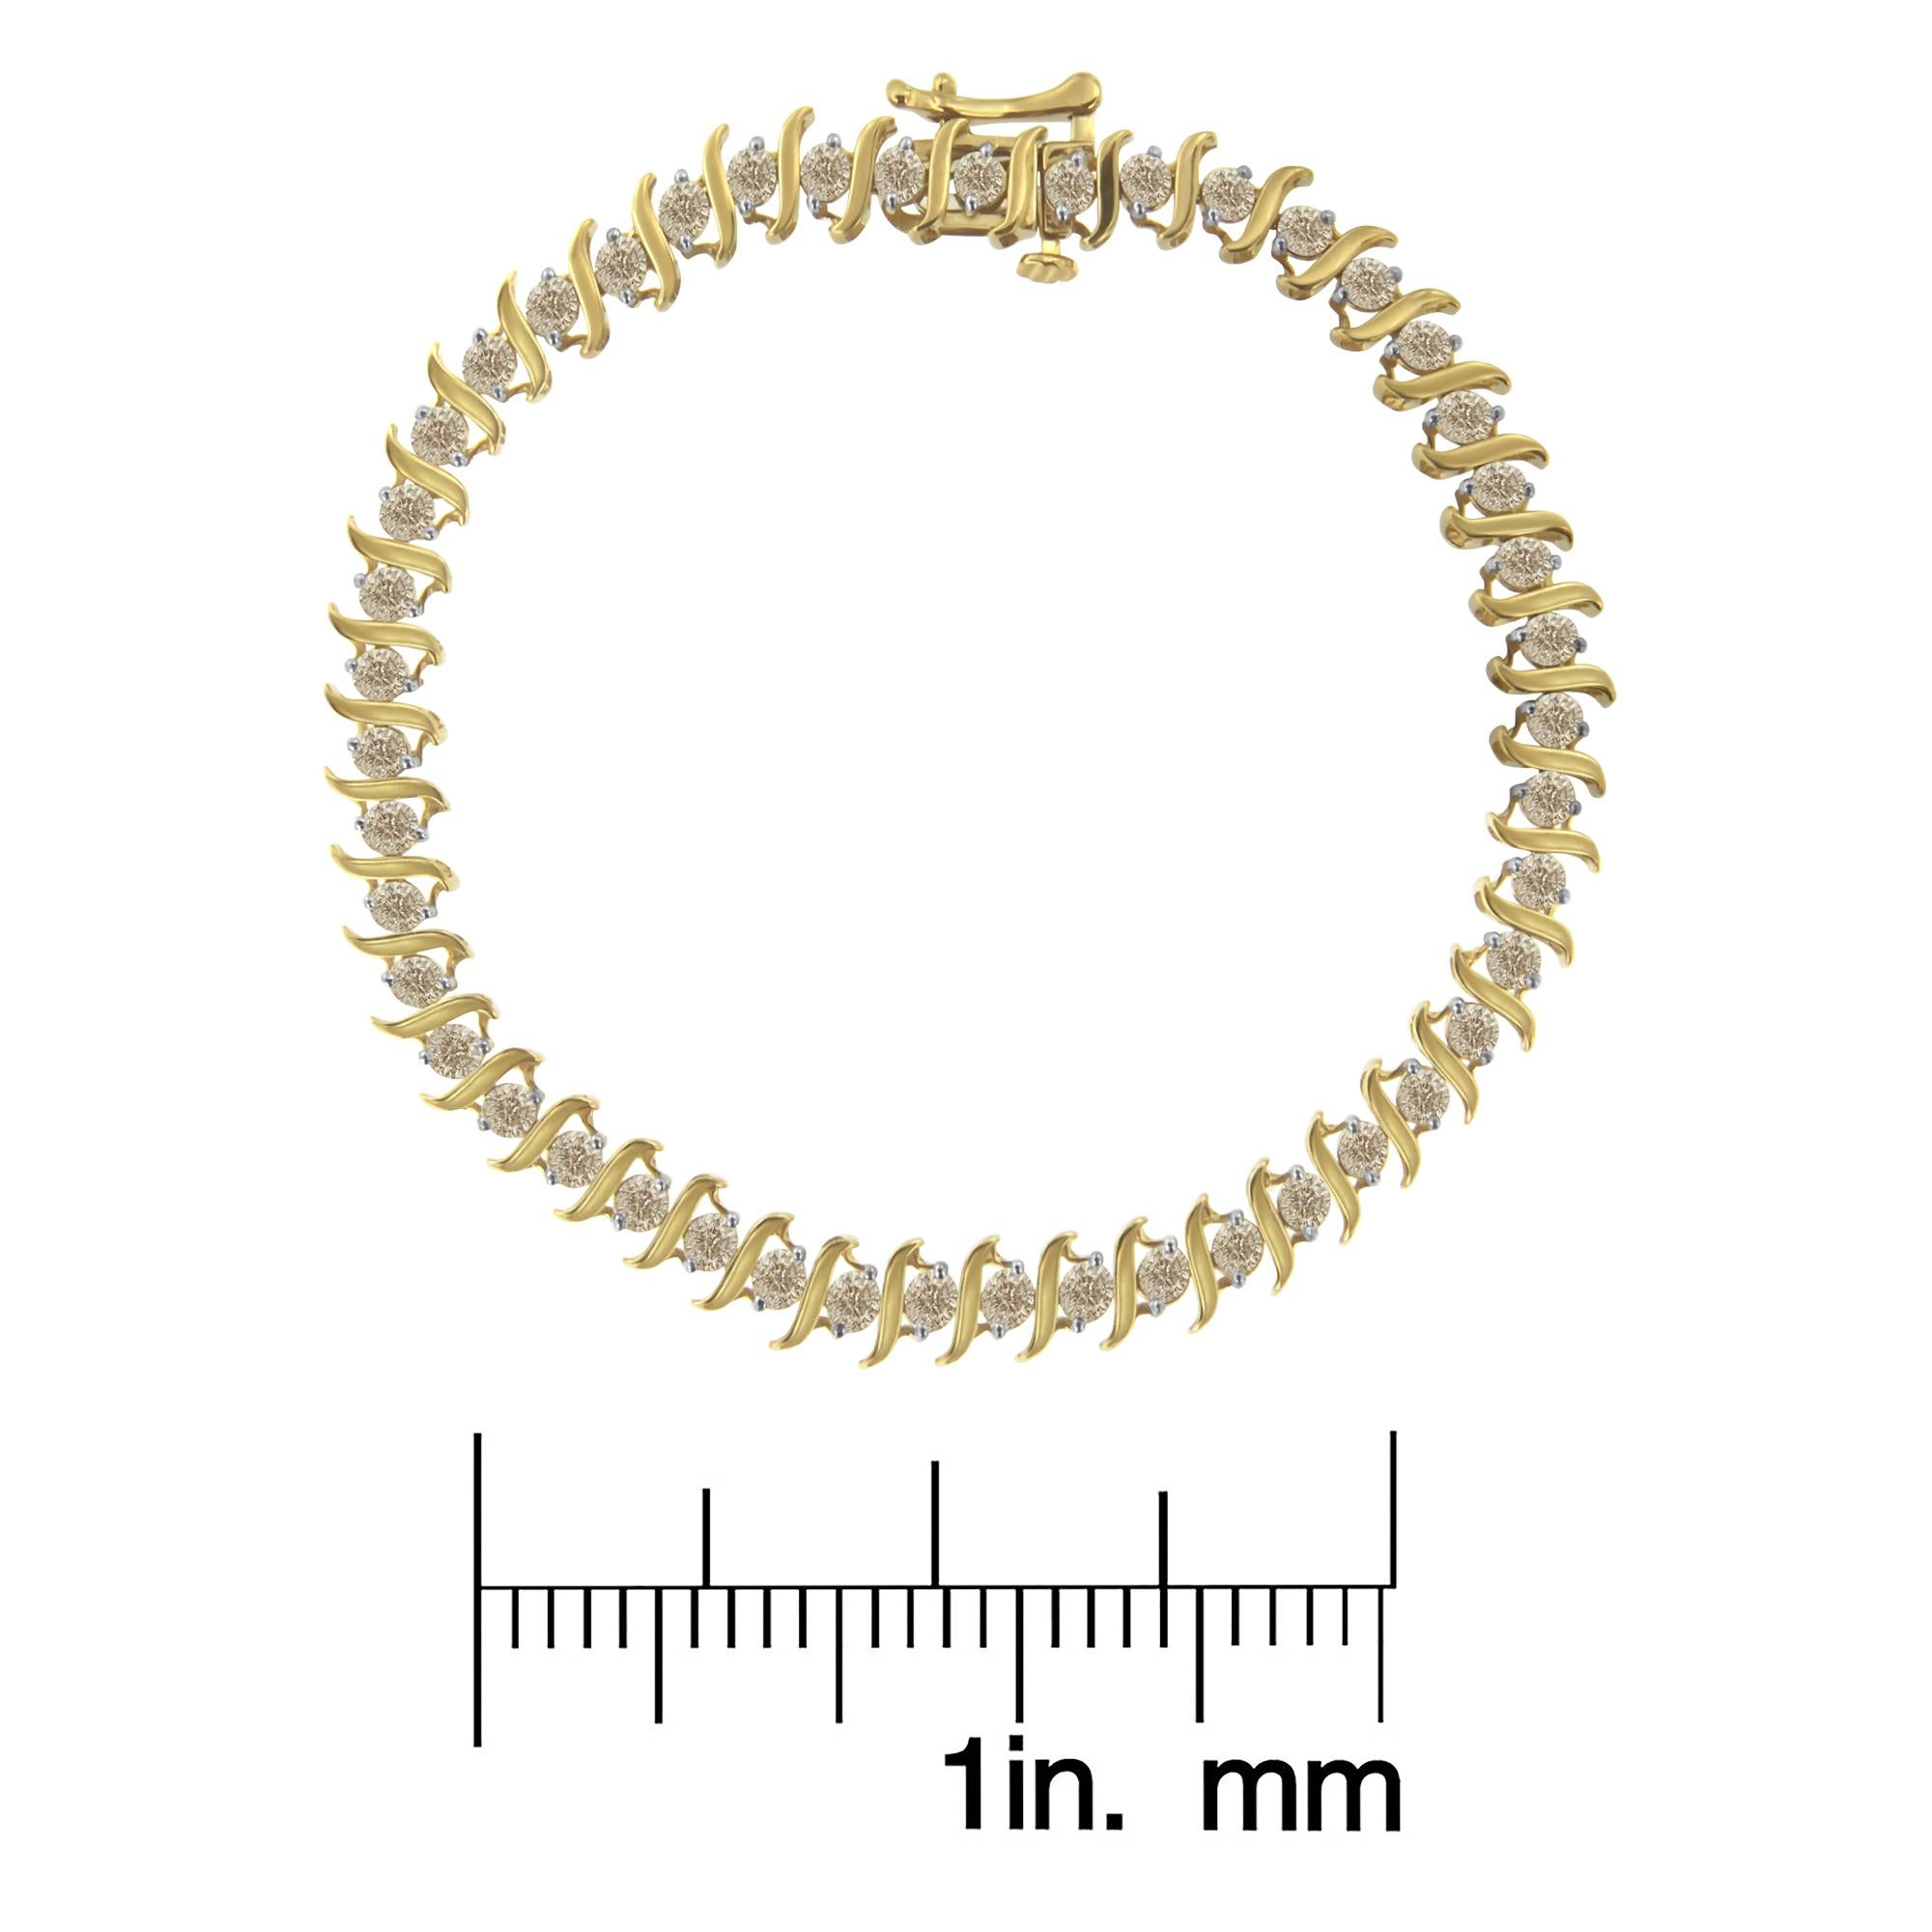 10KT Yellow Gold 3.0 Carat Diamond S-Link Bracelet (J-K Color, I2-I3 Clarity) In New Condition For Sale In New York, NY